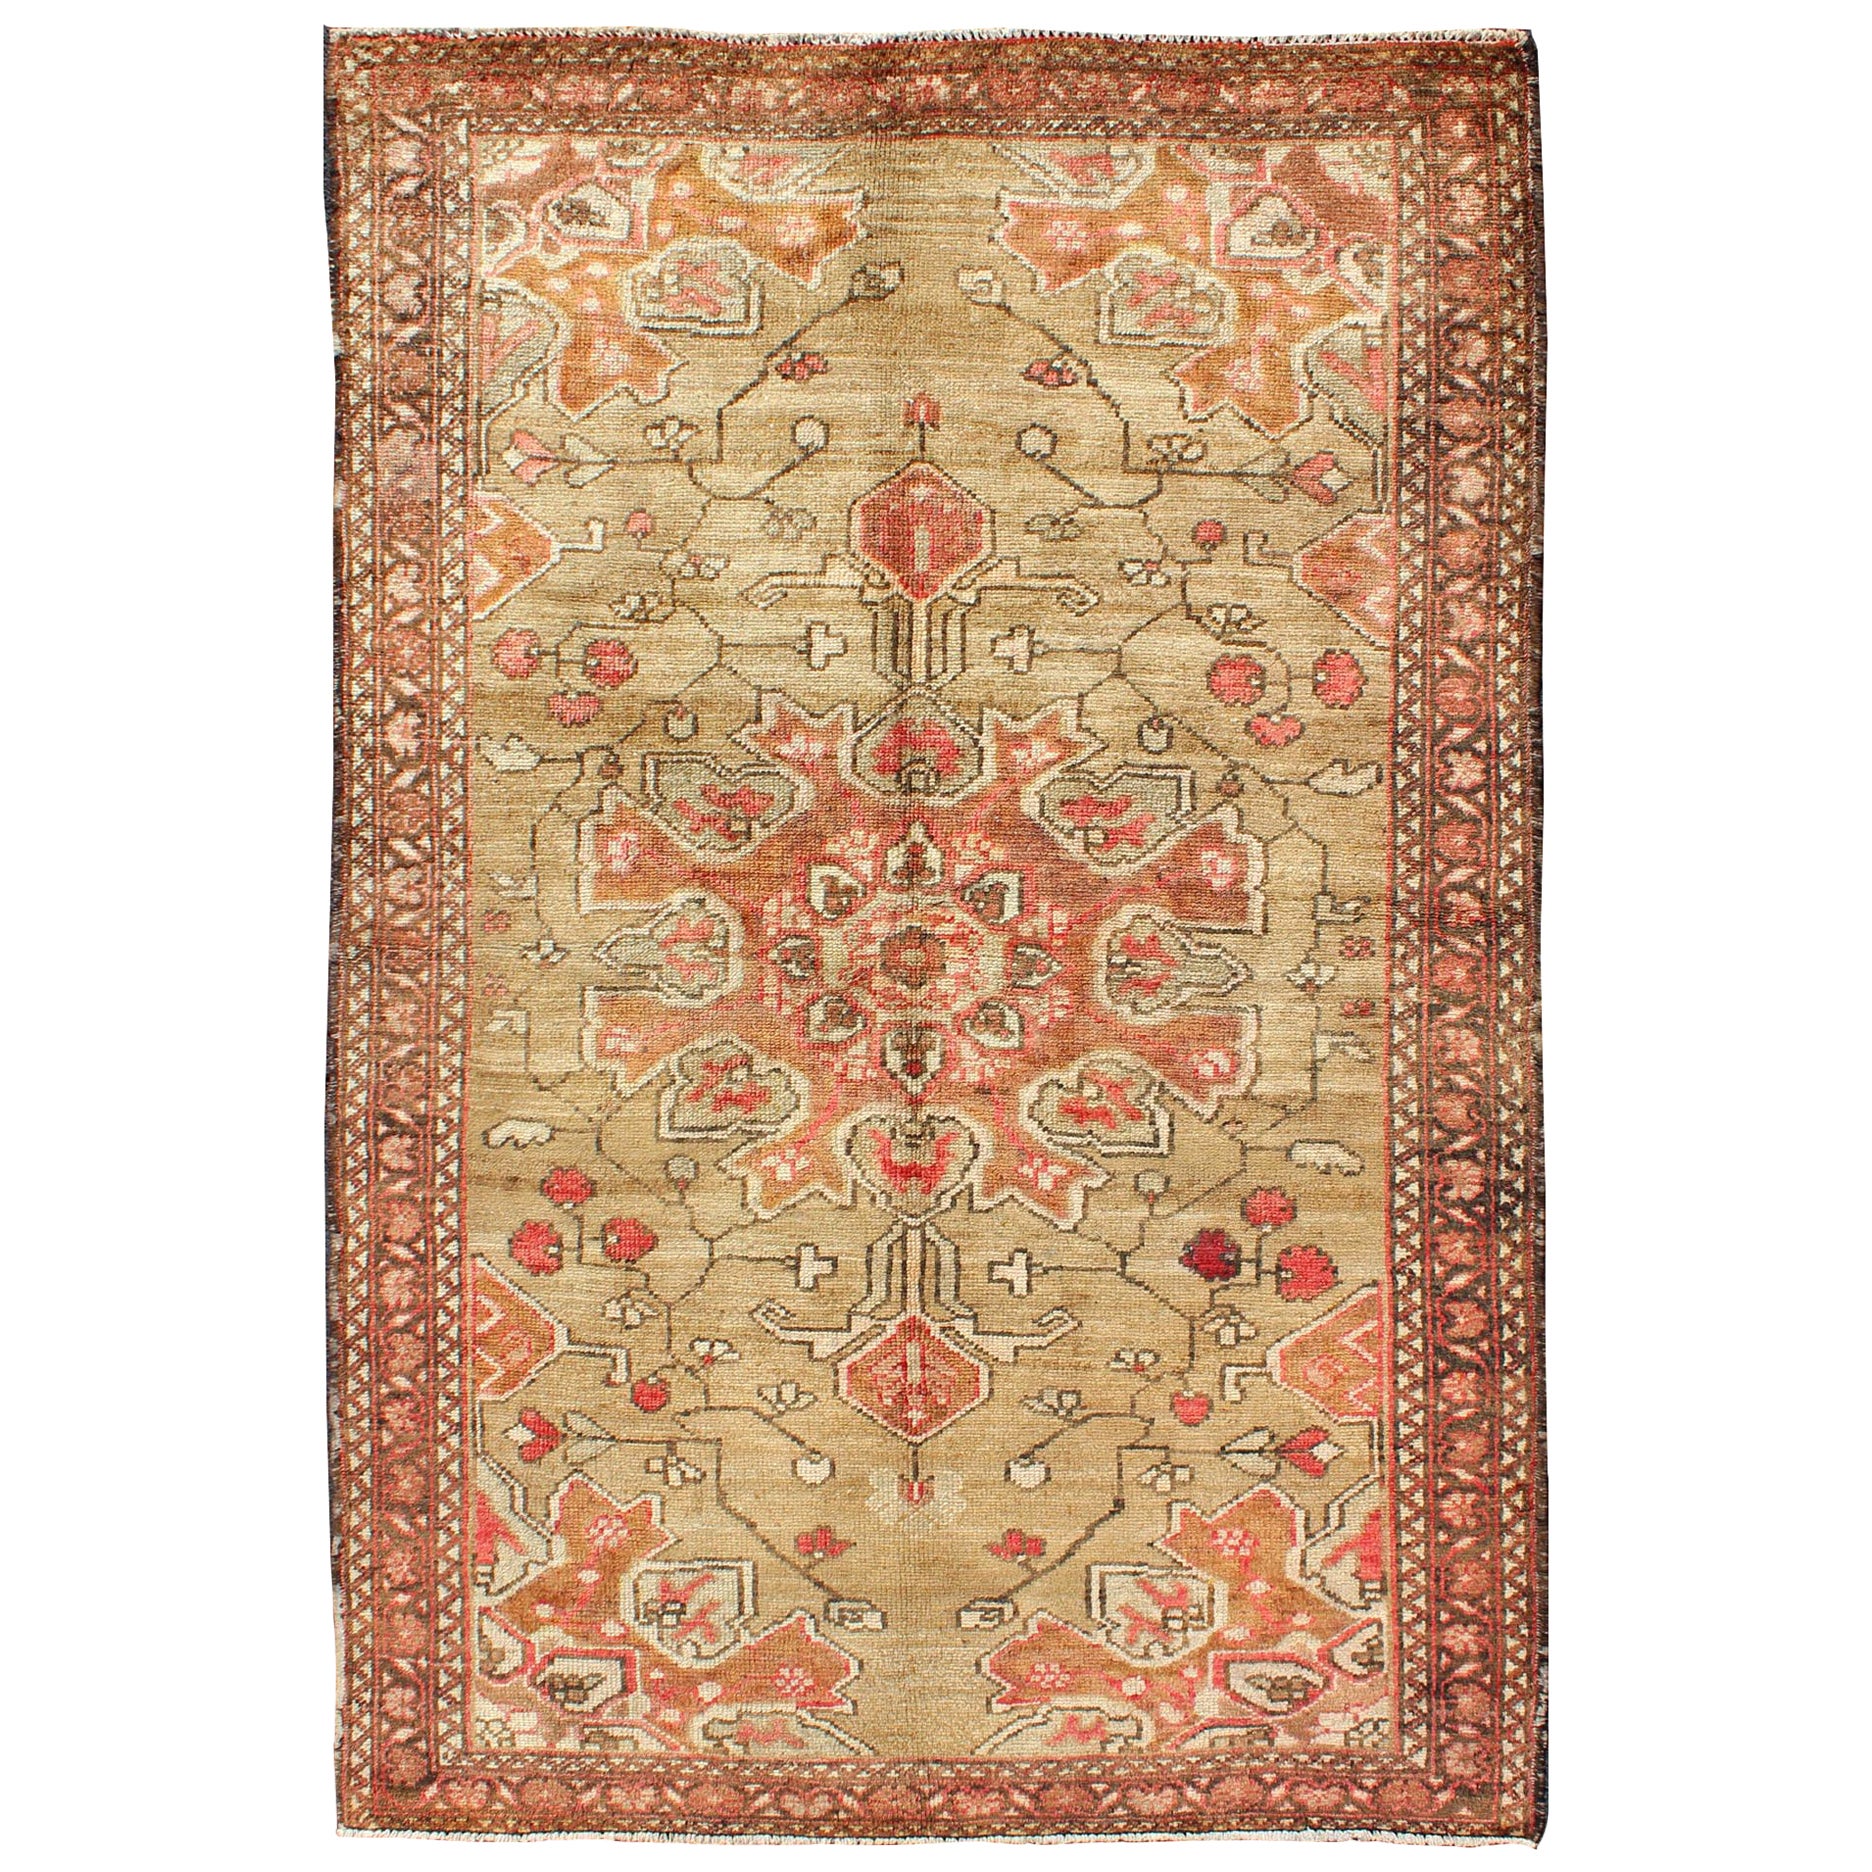 Vintage Persian Rug with Tribal Design in Beautiful Green and Coral Colors